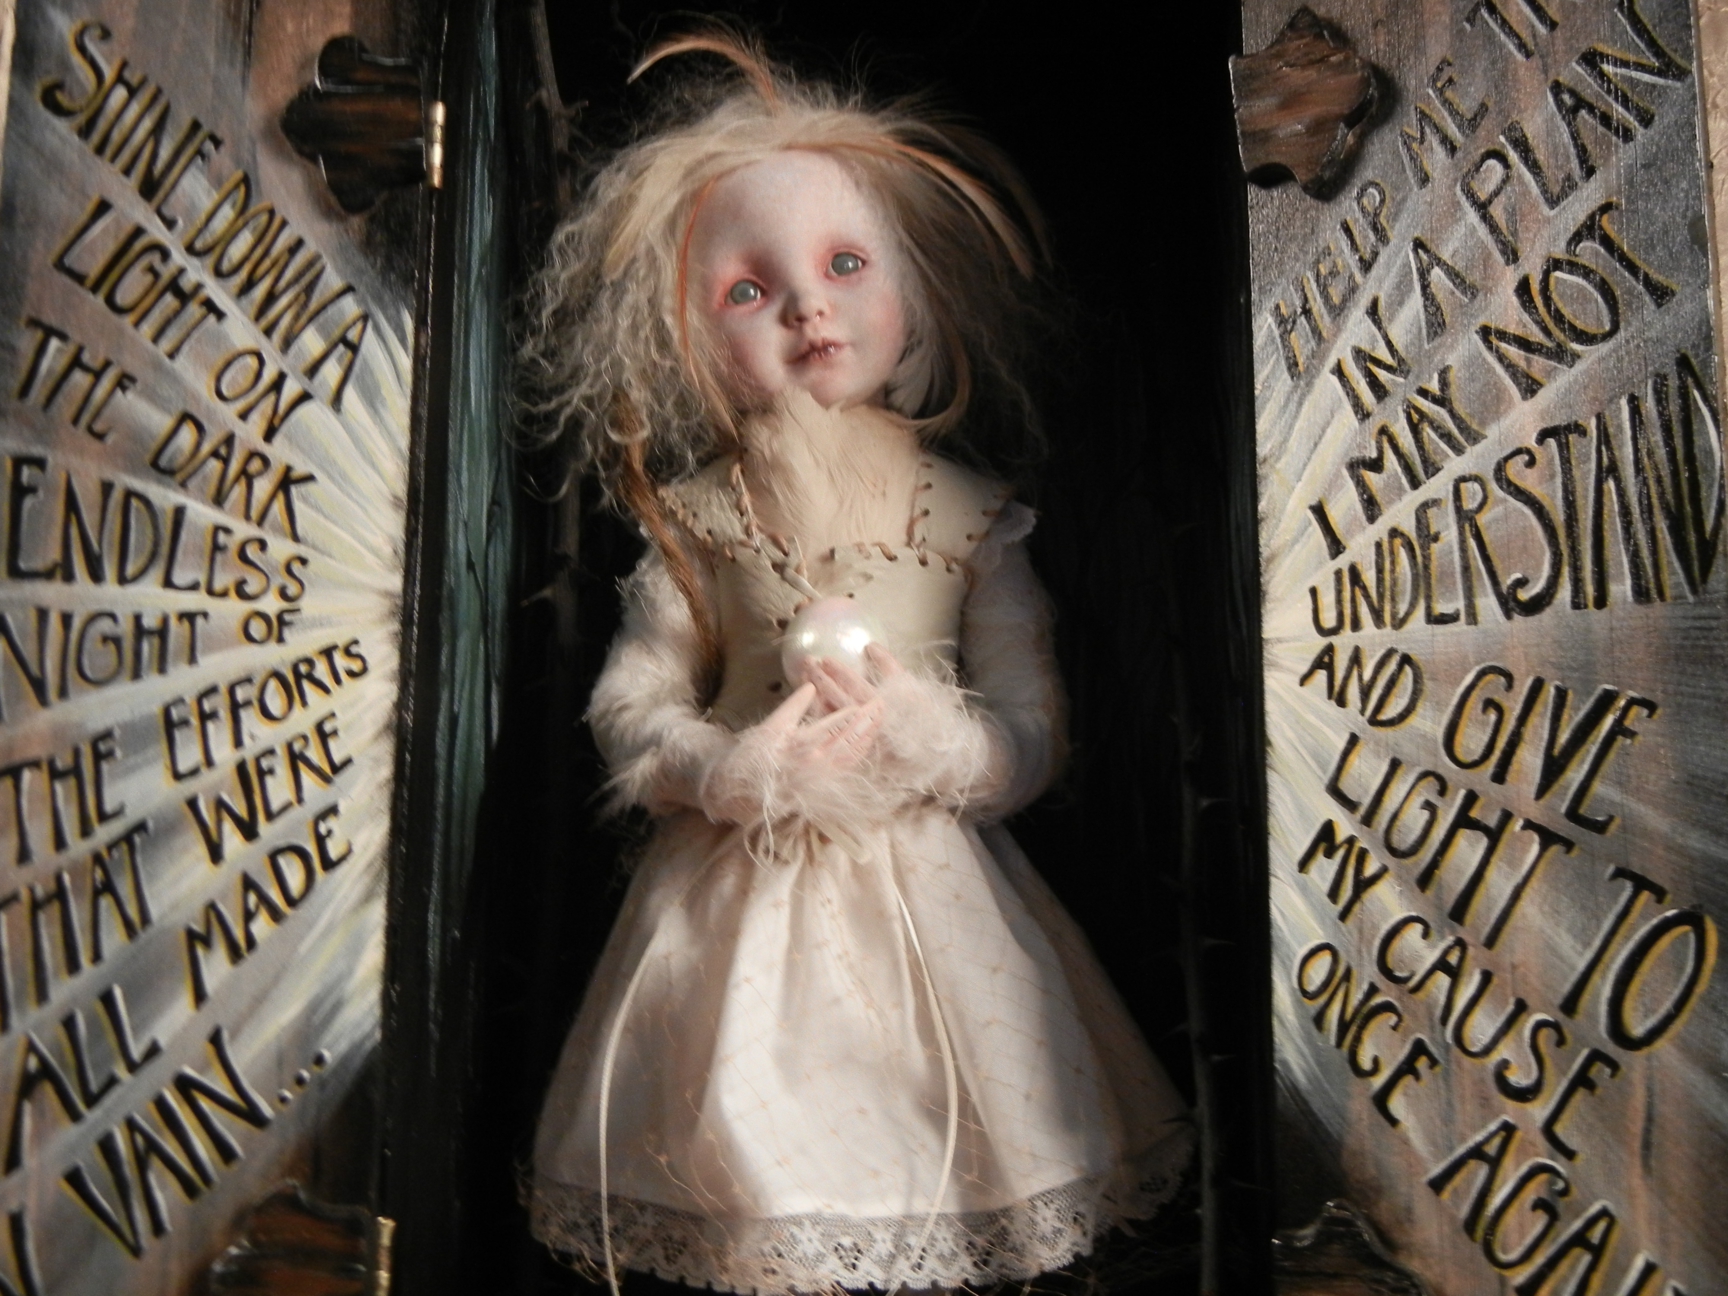 close-up open mixed media cabinet reveals taxidermy artdoll assemblage blonde wild doll in white dress with bird feet